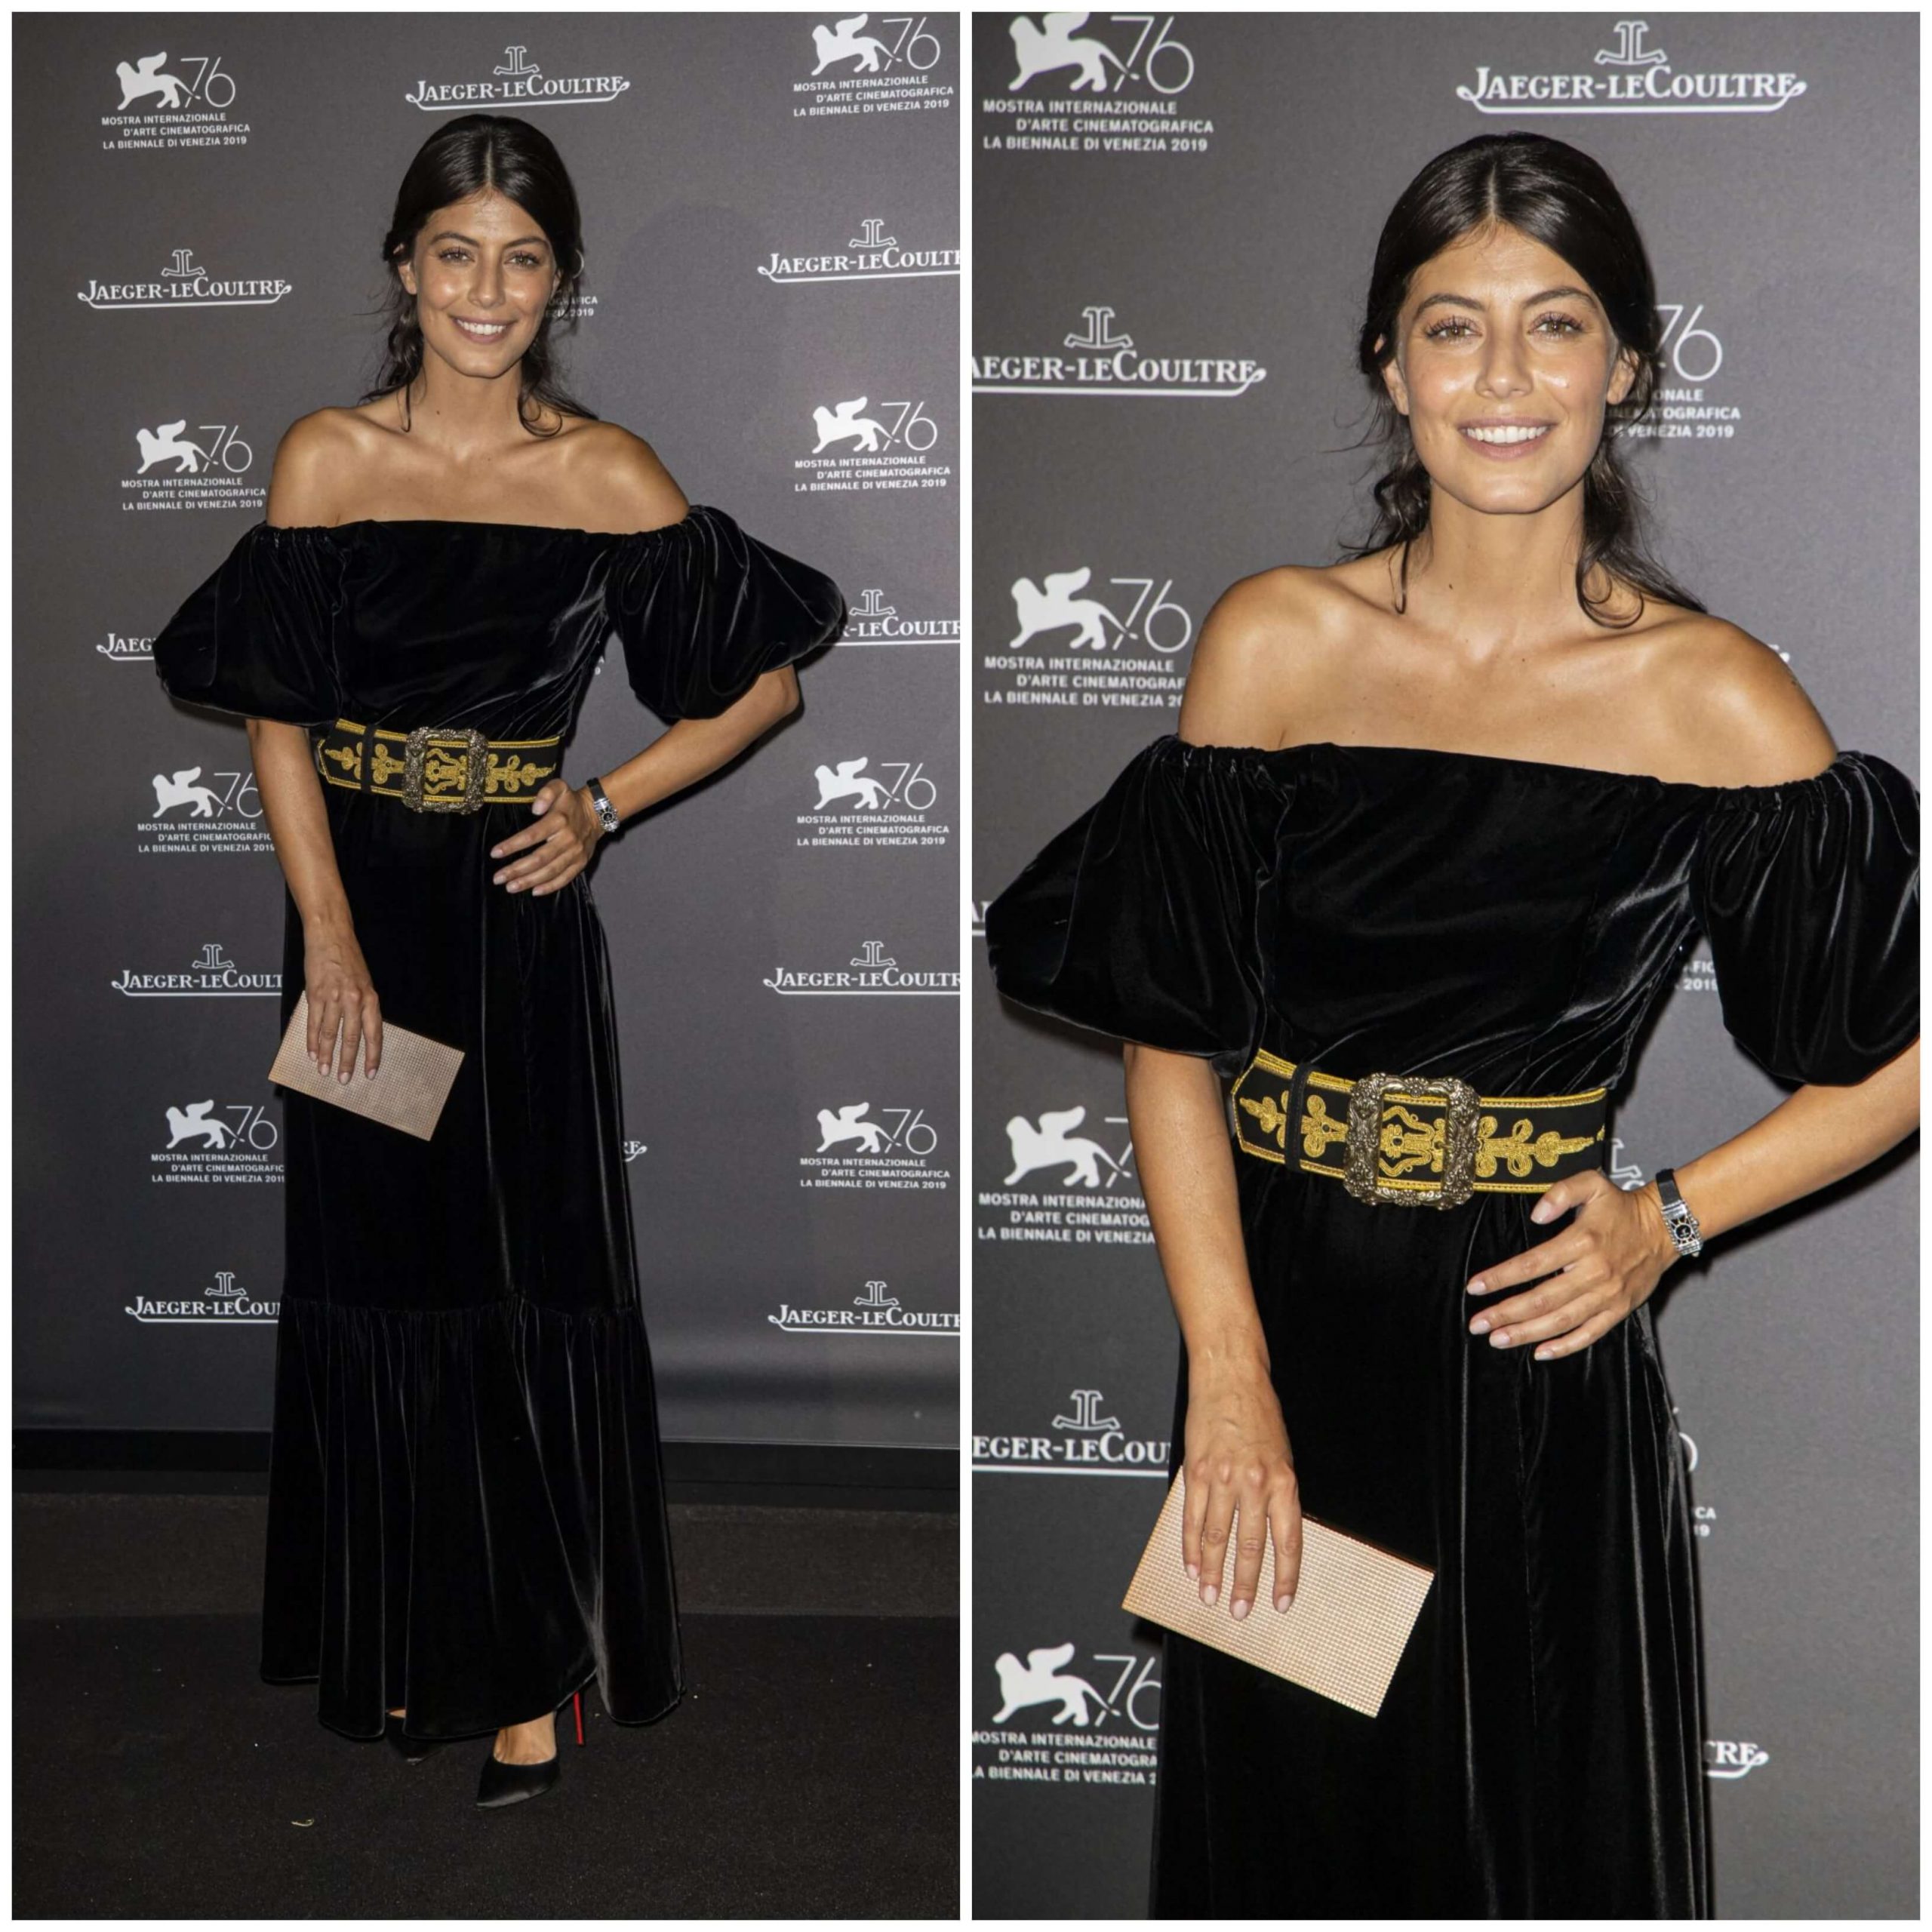 Alessandra Mastronardi – In Black Velvet Off Shoulder Long Gown -  Jaeger-Le Coultre Gala Nigth at the Granai Cipriani in Venice